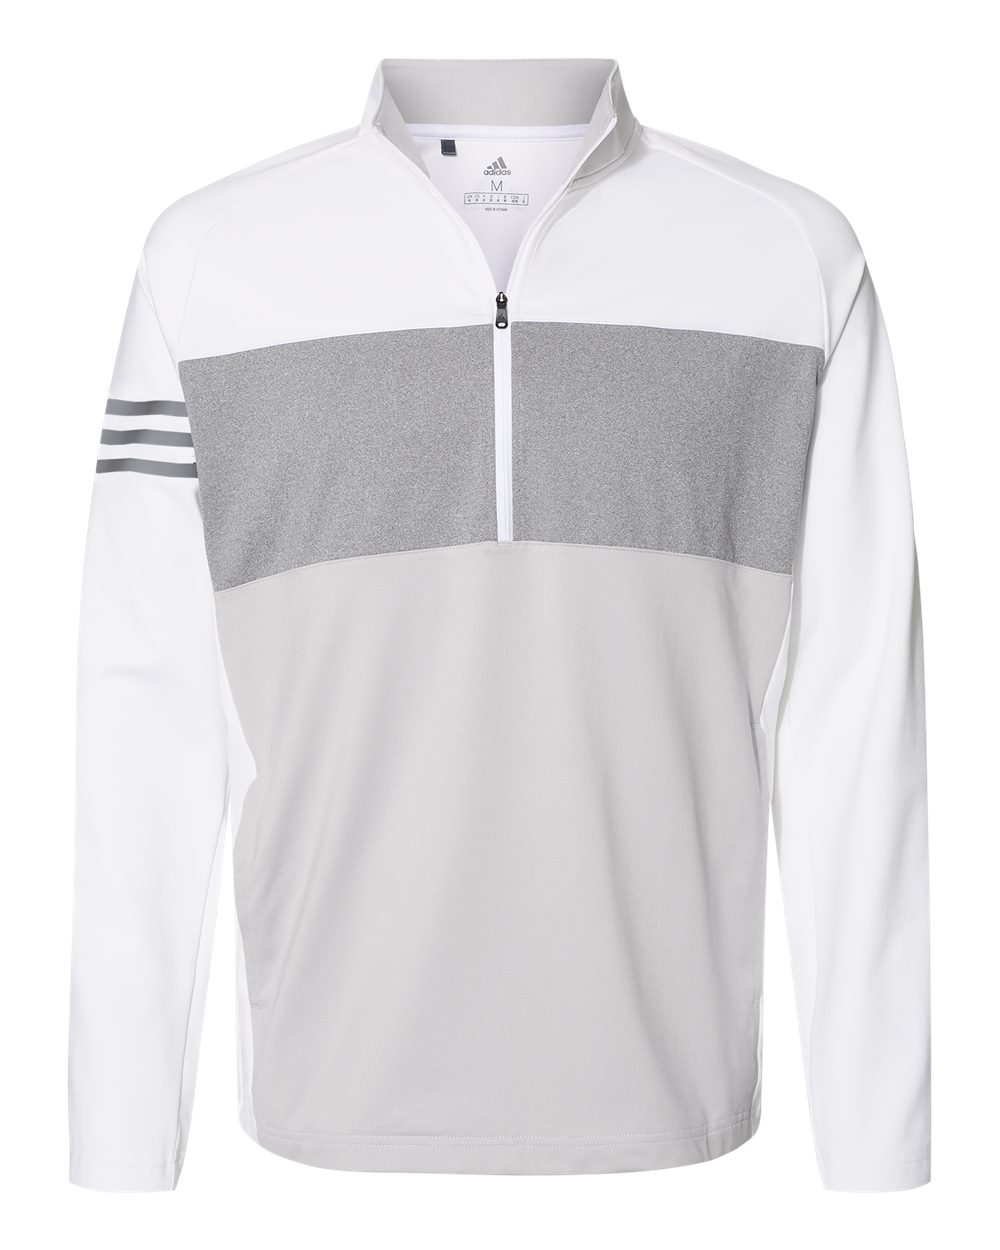 3-Stripes Competition Quarter-Zip Pullover-Adidas